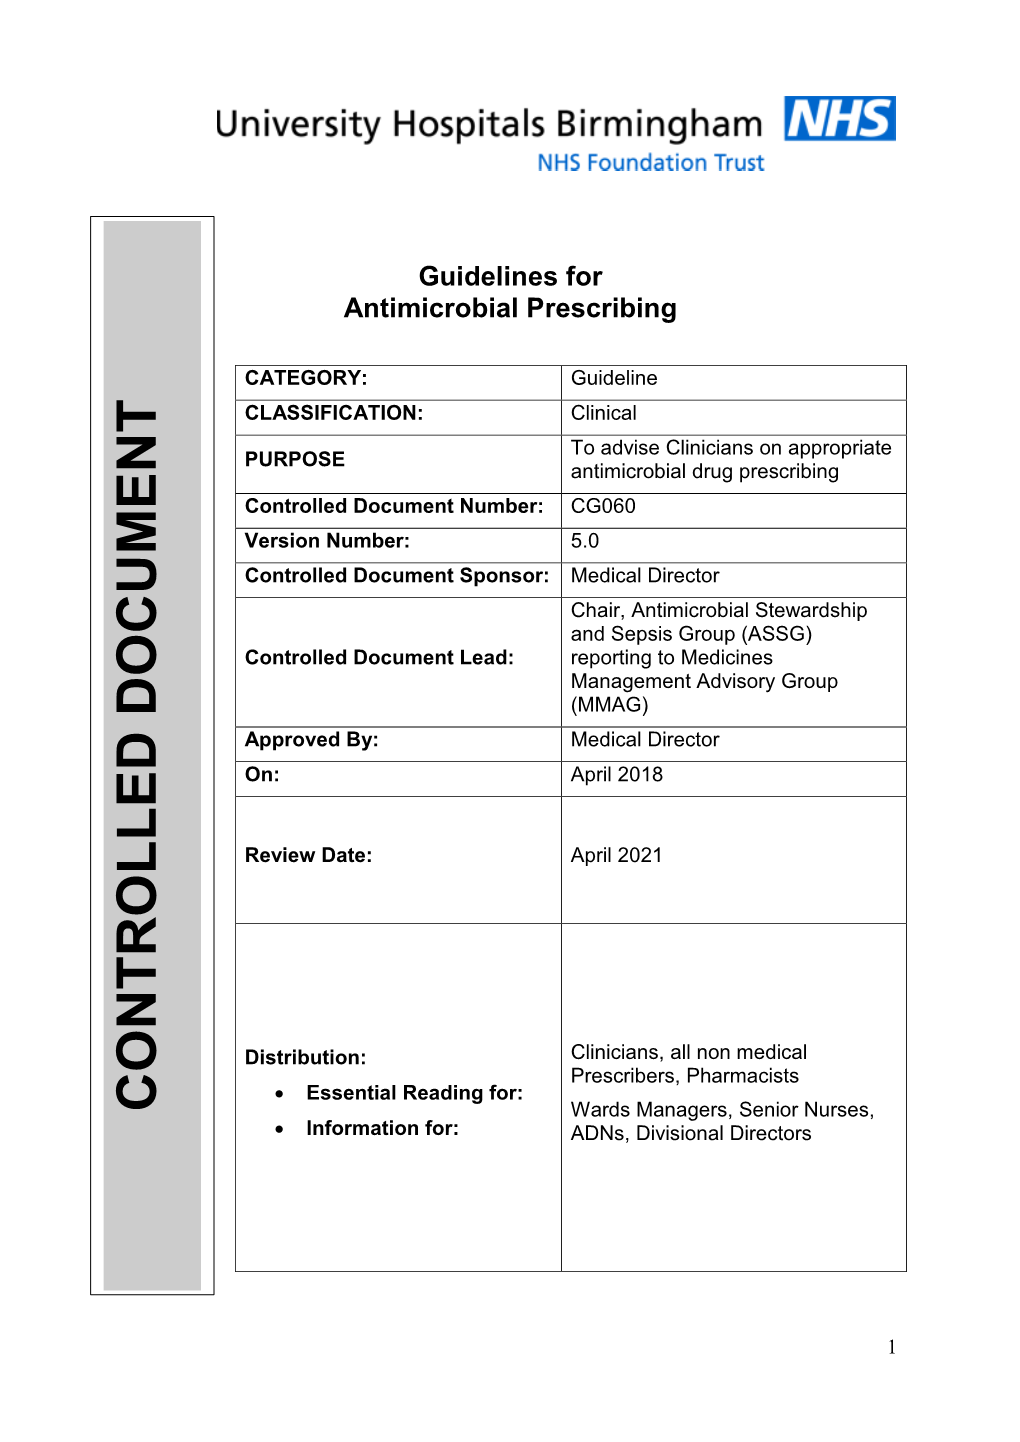 Guidelines for Antimicrobial Prescribing